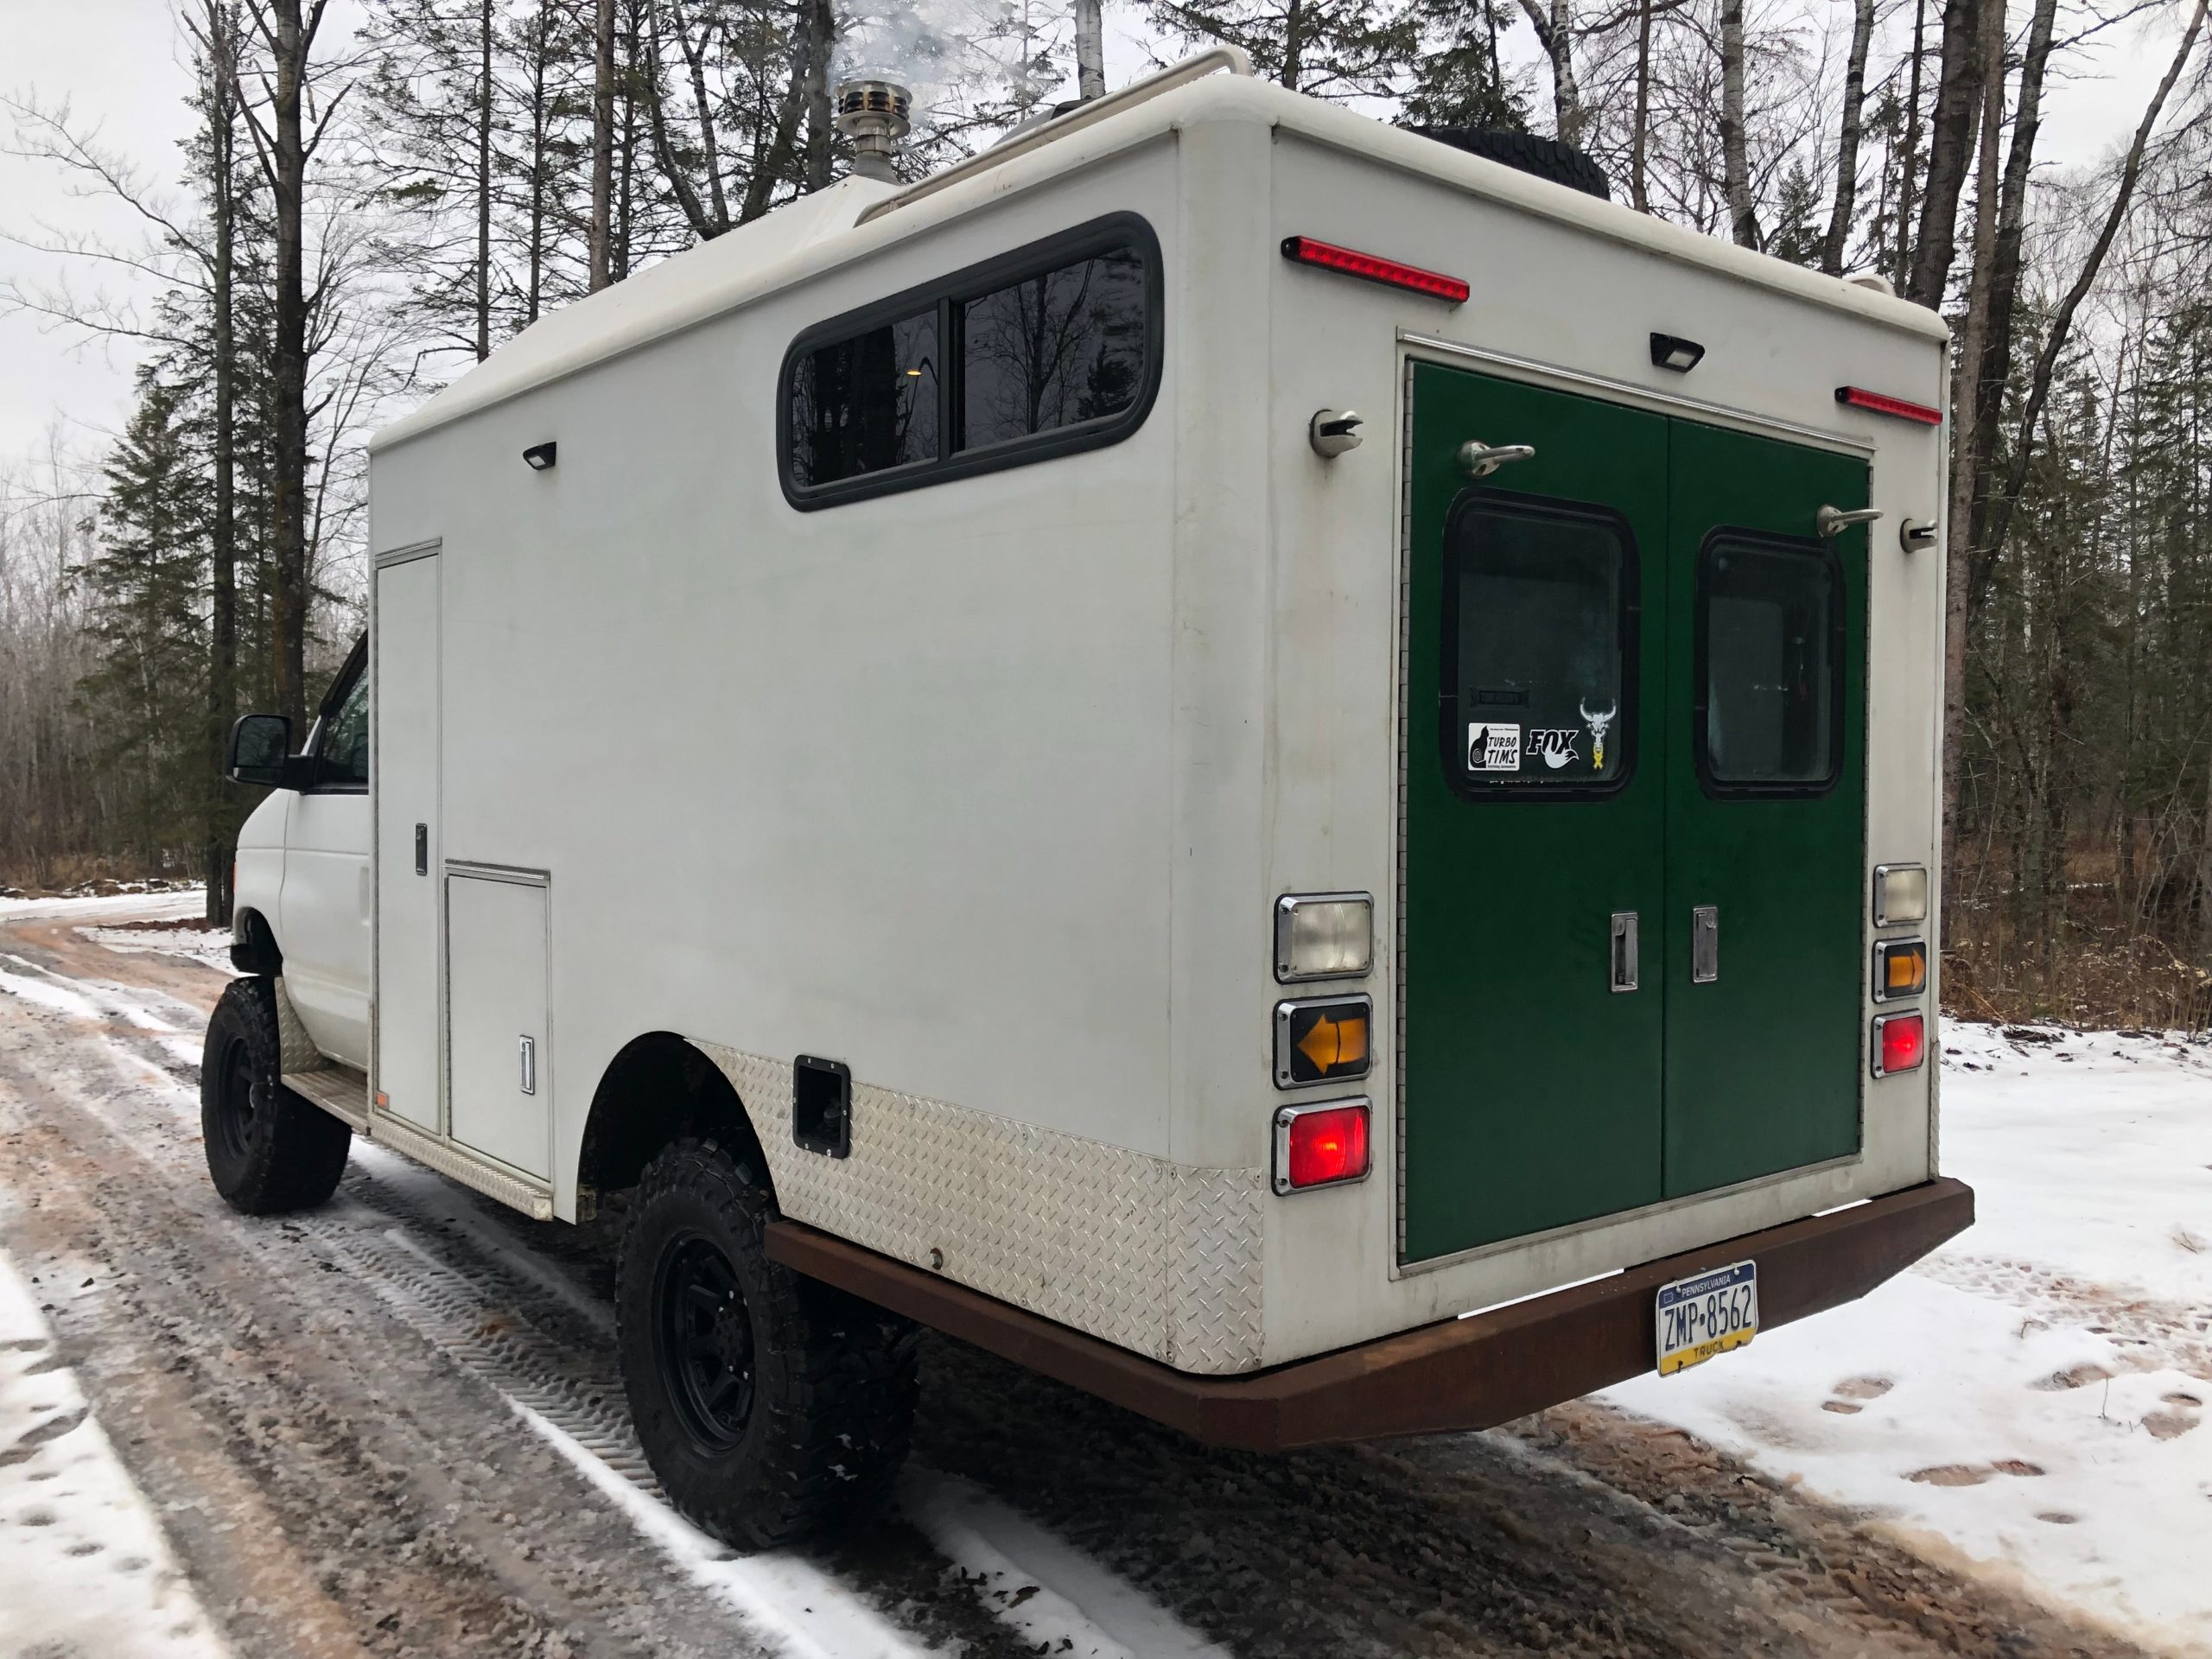 This Ford E-350 Ambulance Traded Its Lights and Sirens for a Lift Kit and Camper Conversion